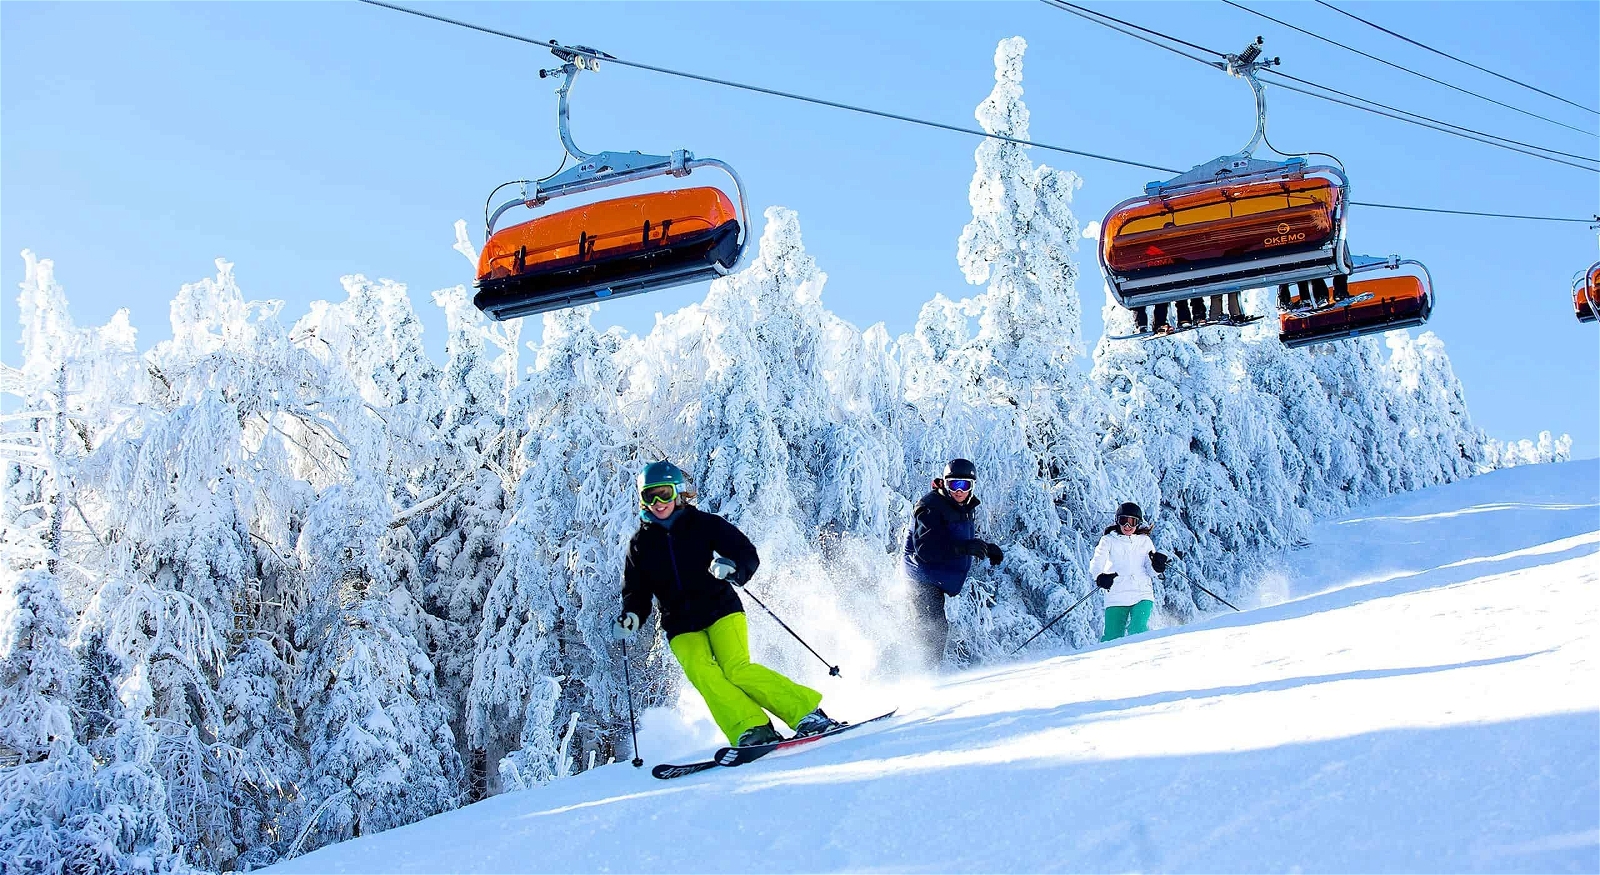 Ski Vacation Package - Stay Longer, Save More! 10-15% off 3+ night stays. Book by 2/15/24.